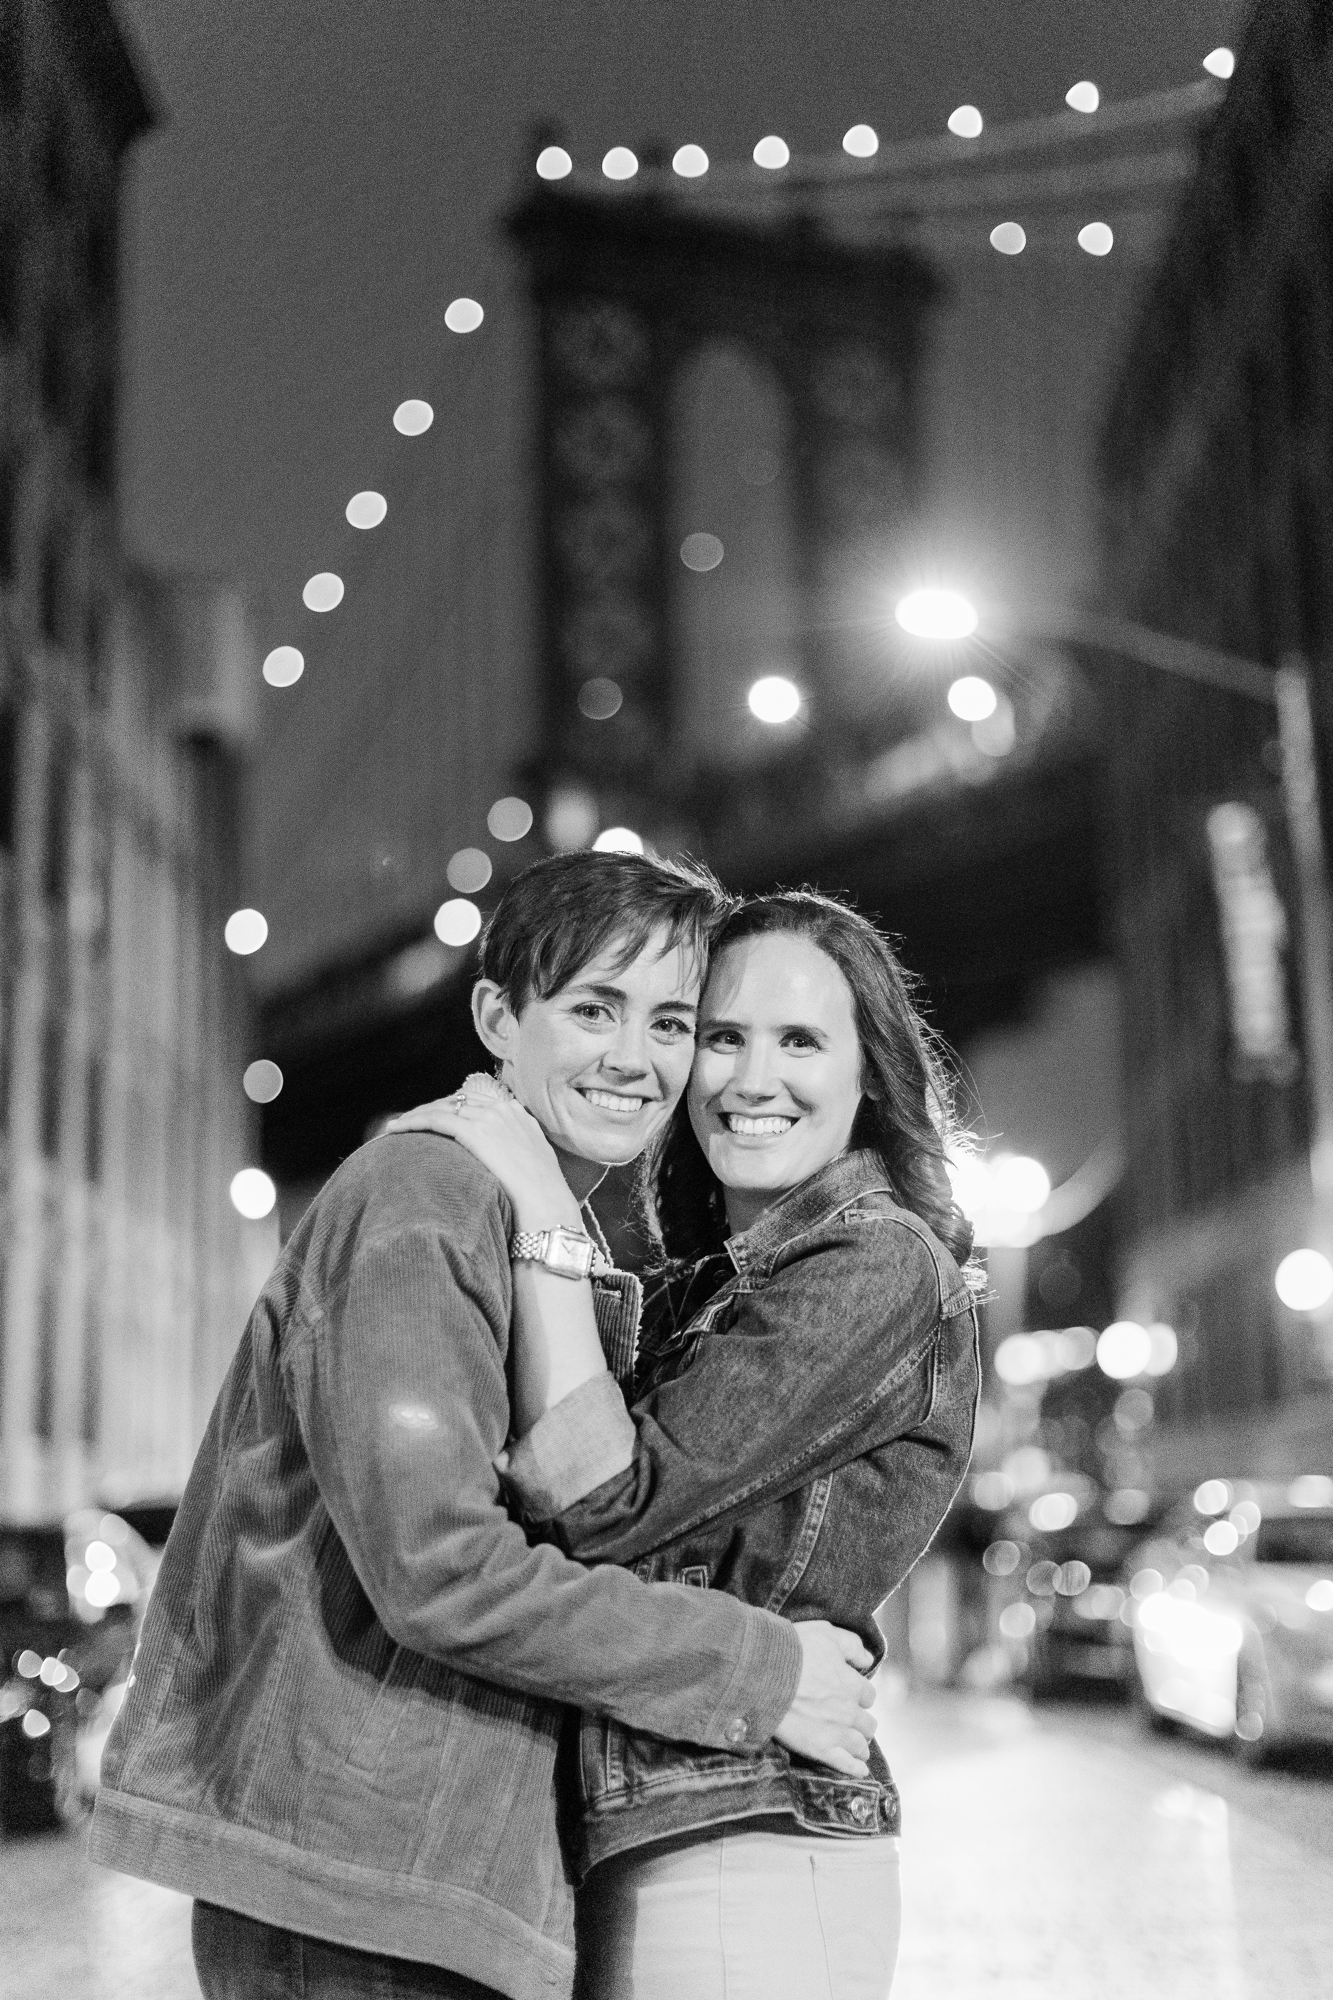 Playful DUMBO Engagement Photo Shoot in NYC